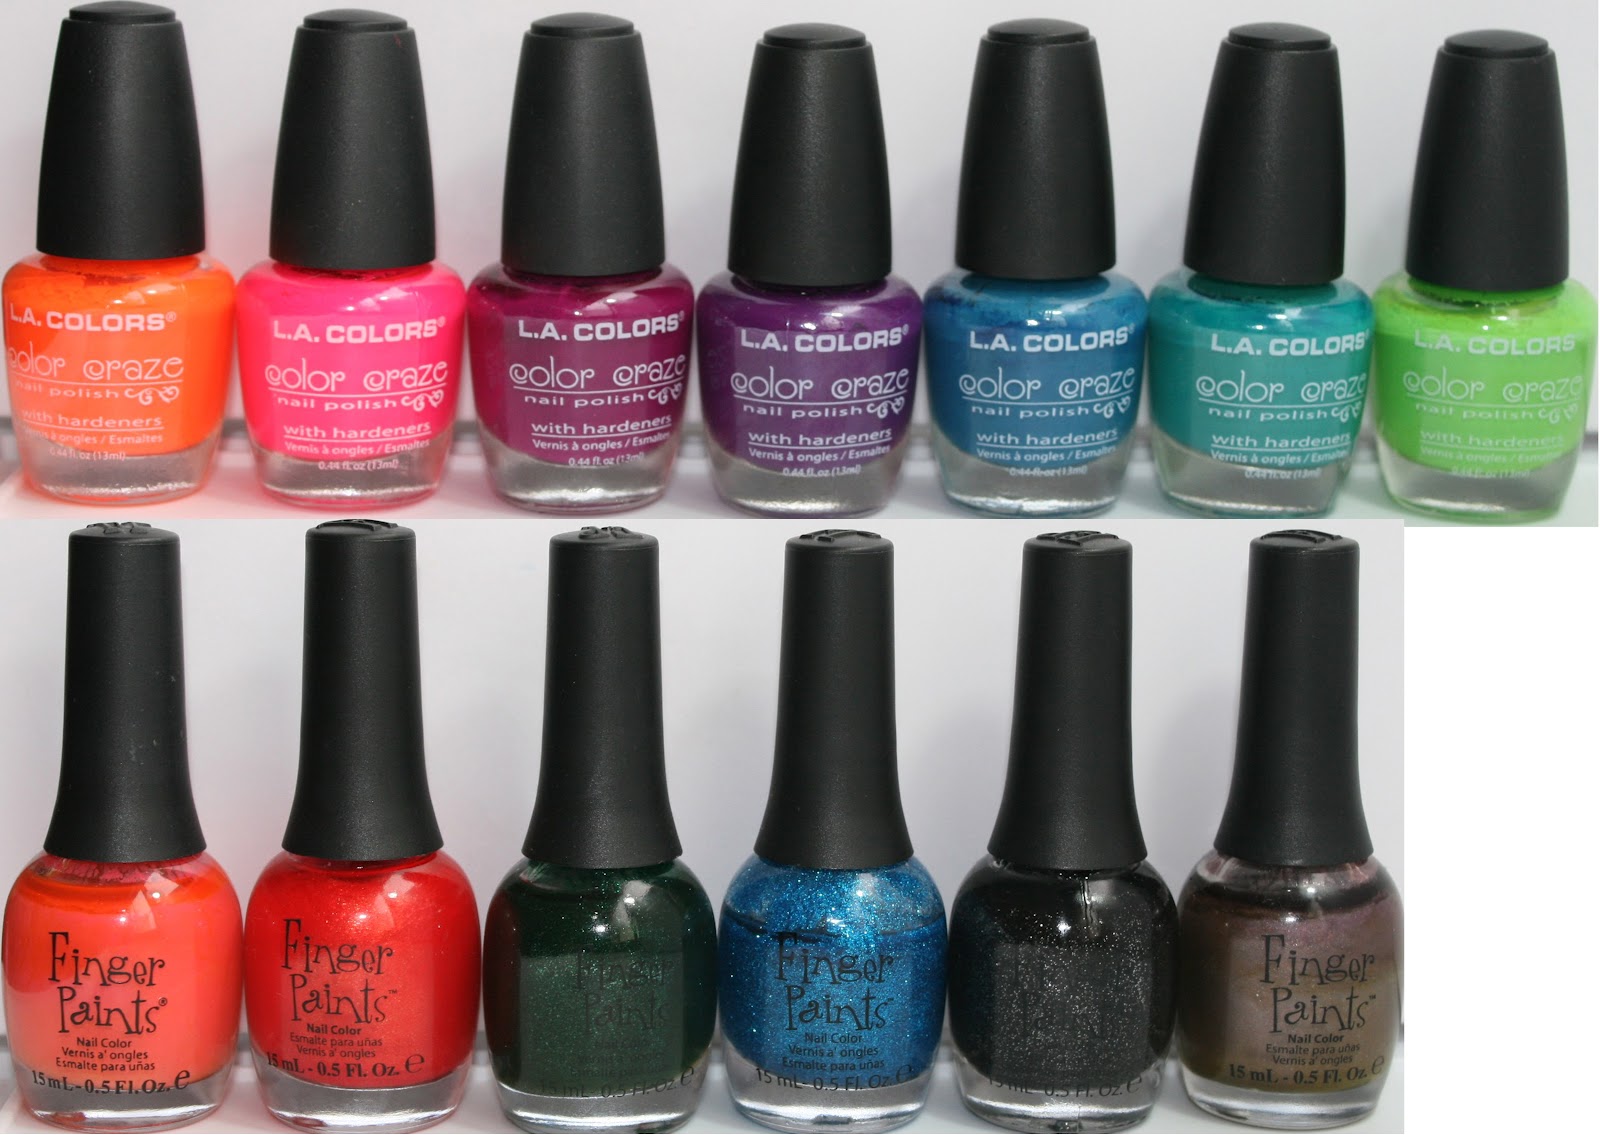 LA Girl Color Pop Nail Polish Swatches - wide 8